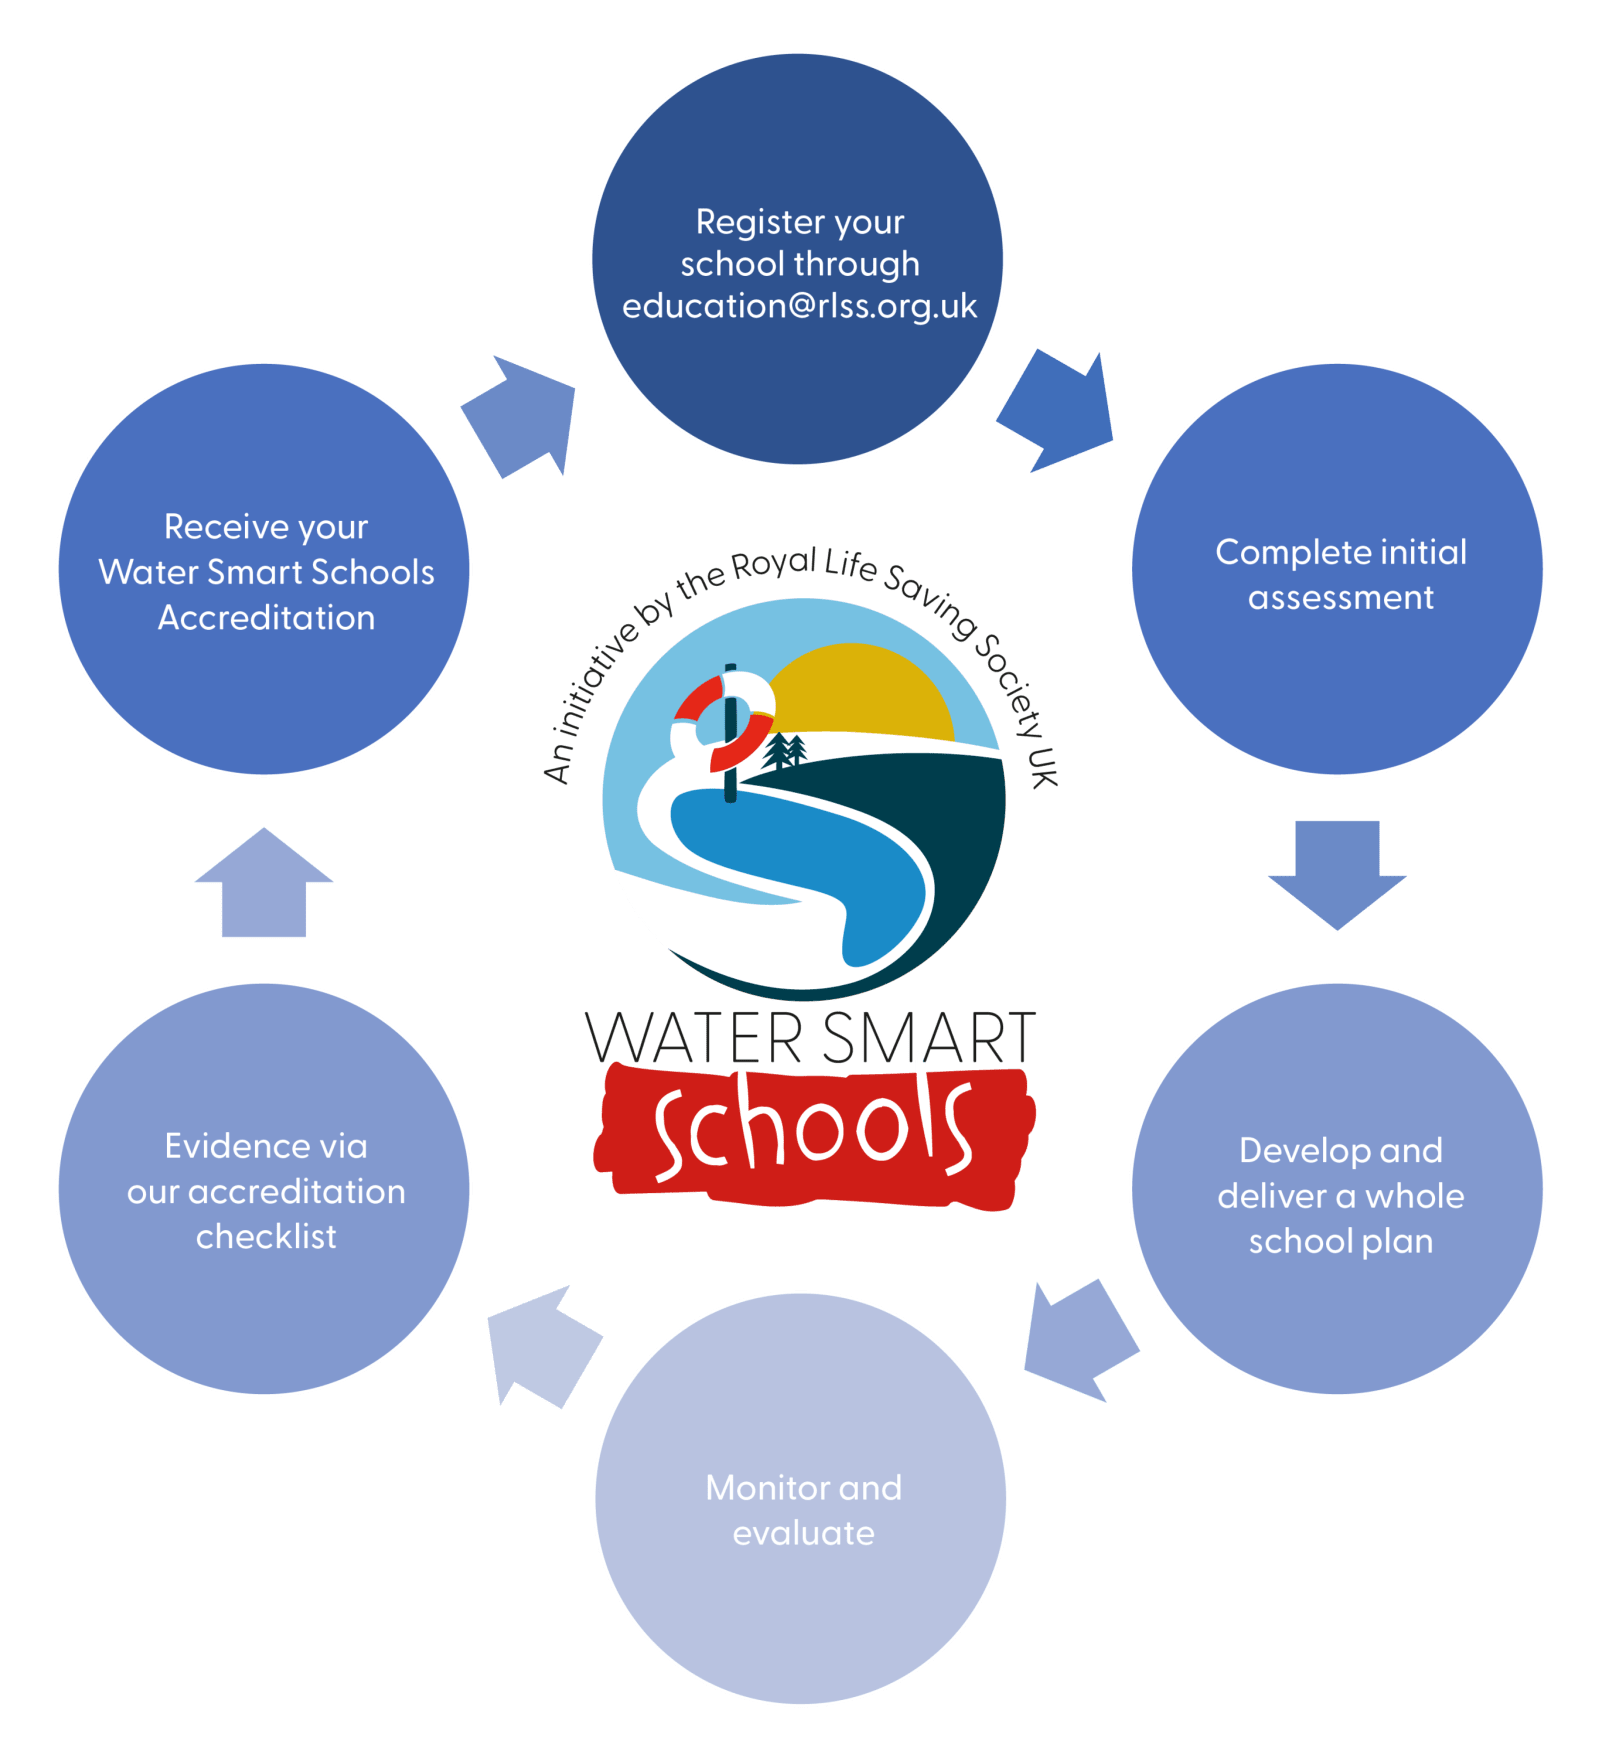 Register your school - Complete initial assessment - Develop and deliver a whole school plan - Monitor and evaluate - Evidence via our accreditation checklist - Receive your Water Smart Schools accreditation